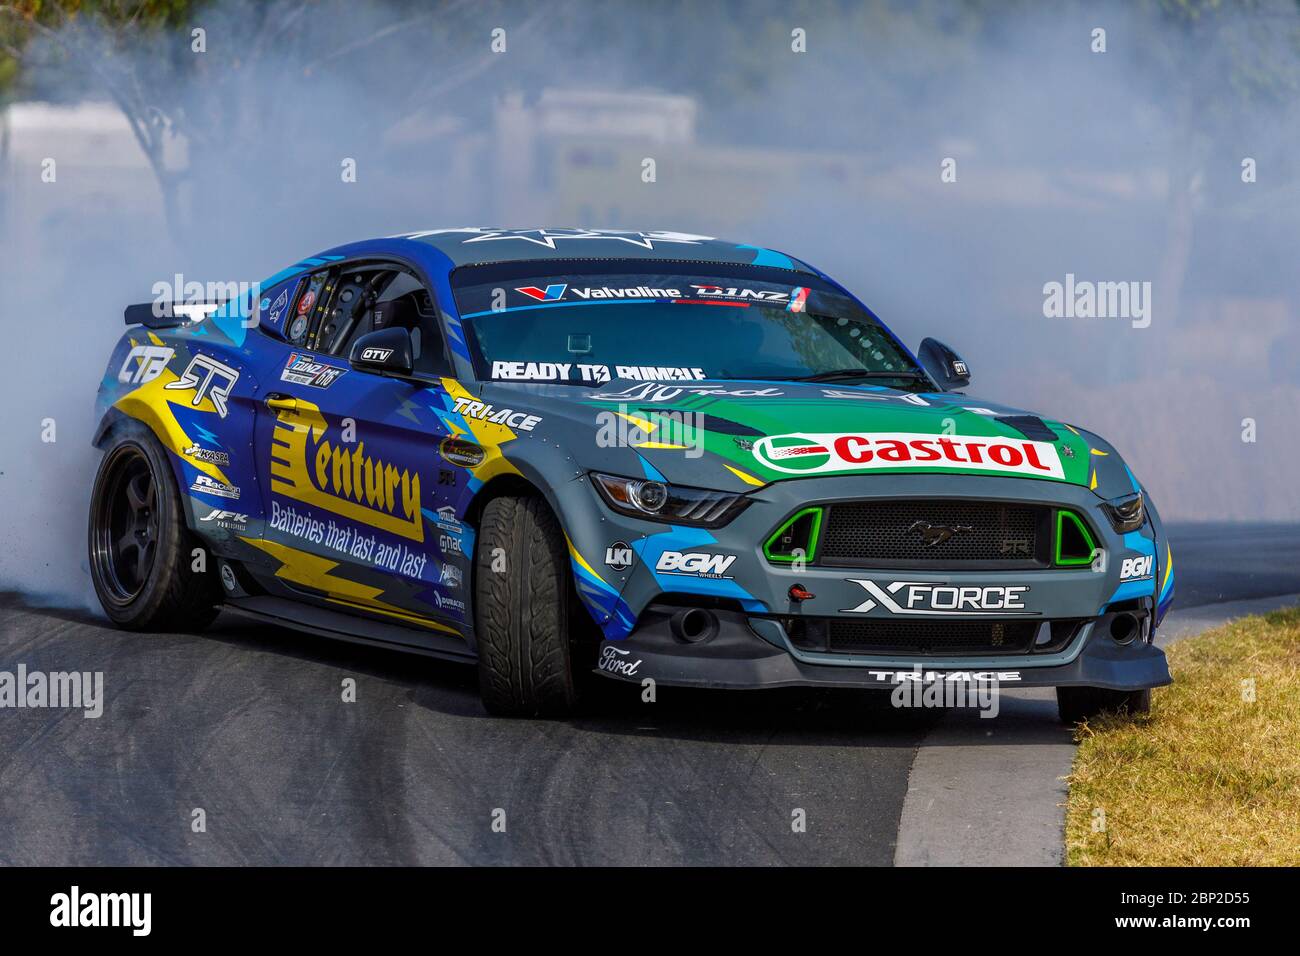 Fanga Dan Woolhouse in seinem 2019 Ford Mustang RTR Supercharged 5 Liter V8  Drift Auto Stockfotografie - Alamy